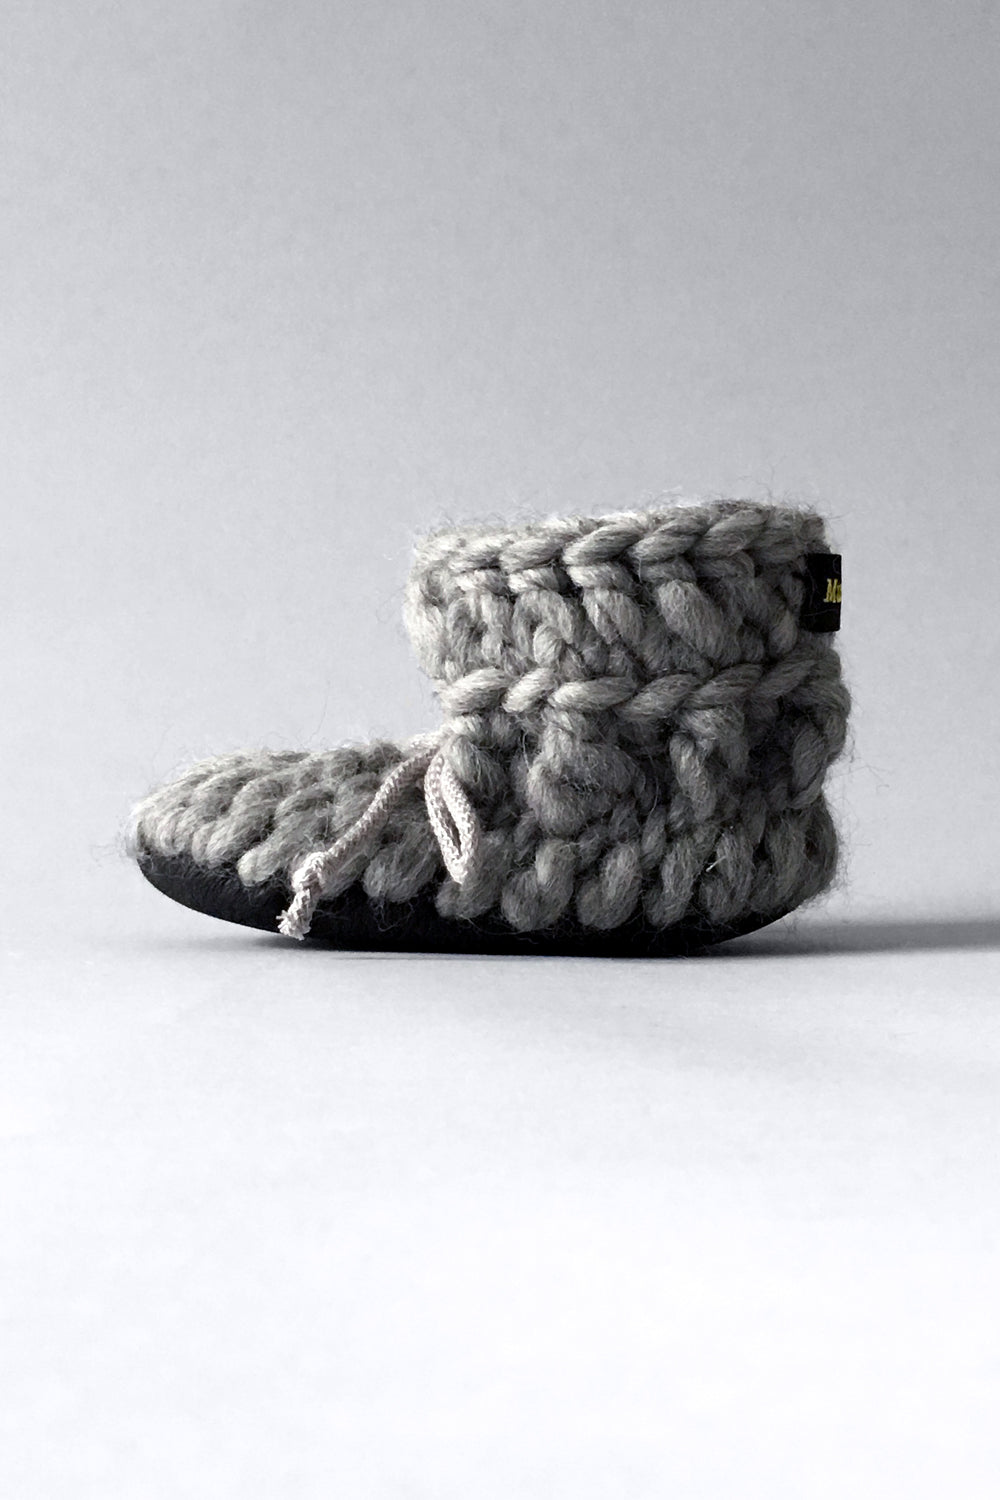 Muffle-Boot: Happy Feet, Pastel Merino Wool Slipper Boots with Leather Soles